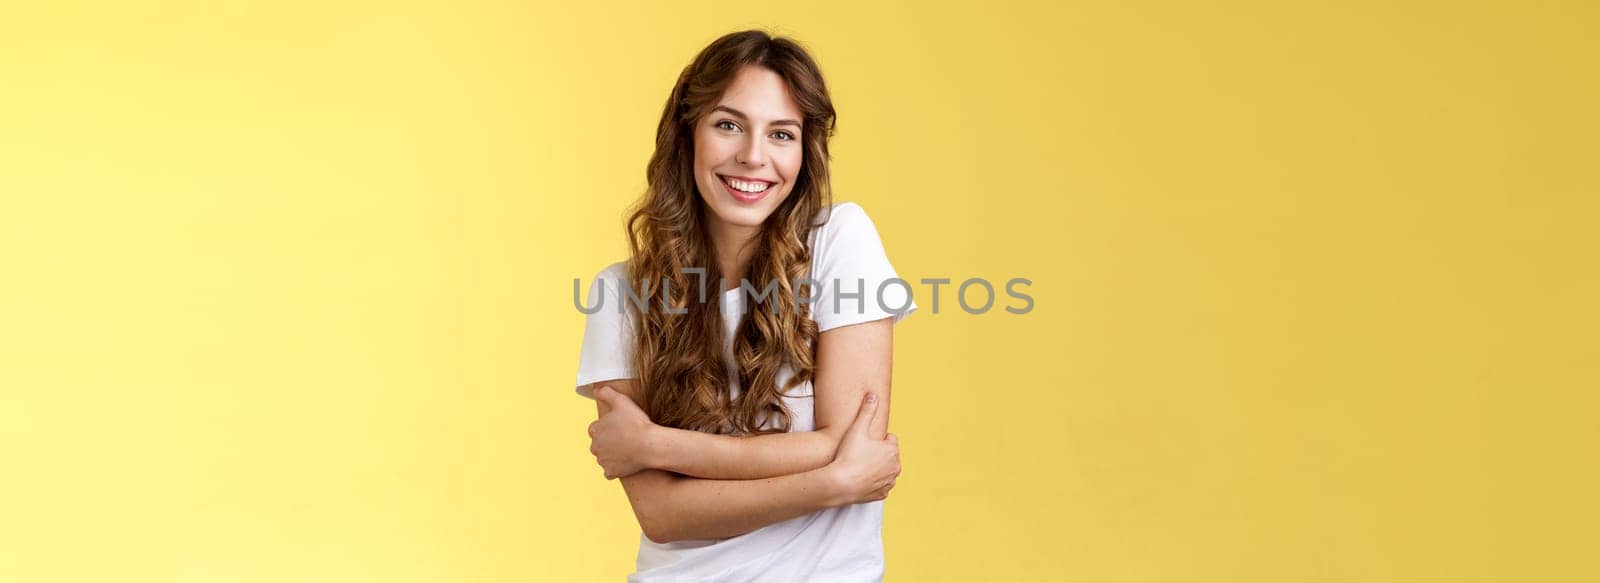 Tender lovely happy good-looking girl long curly hair hug herself wanna warm cuddles smiling toothy pleased friendly conversation having fun wear white t-shirt embracing own body yellow background. Lifestyle.